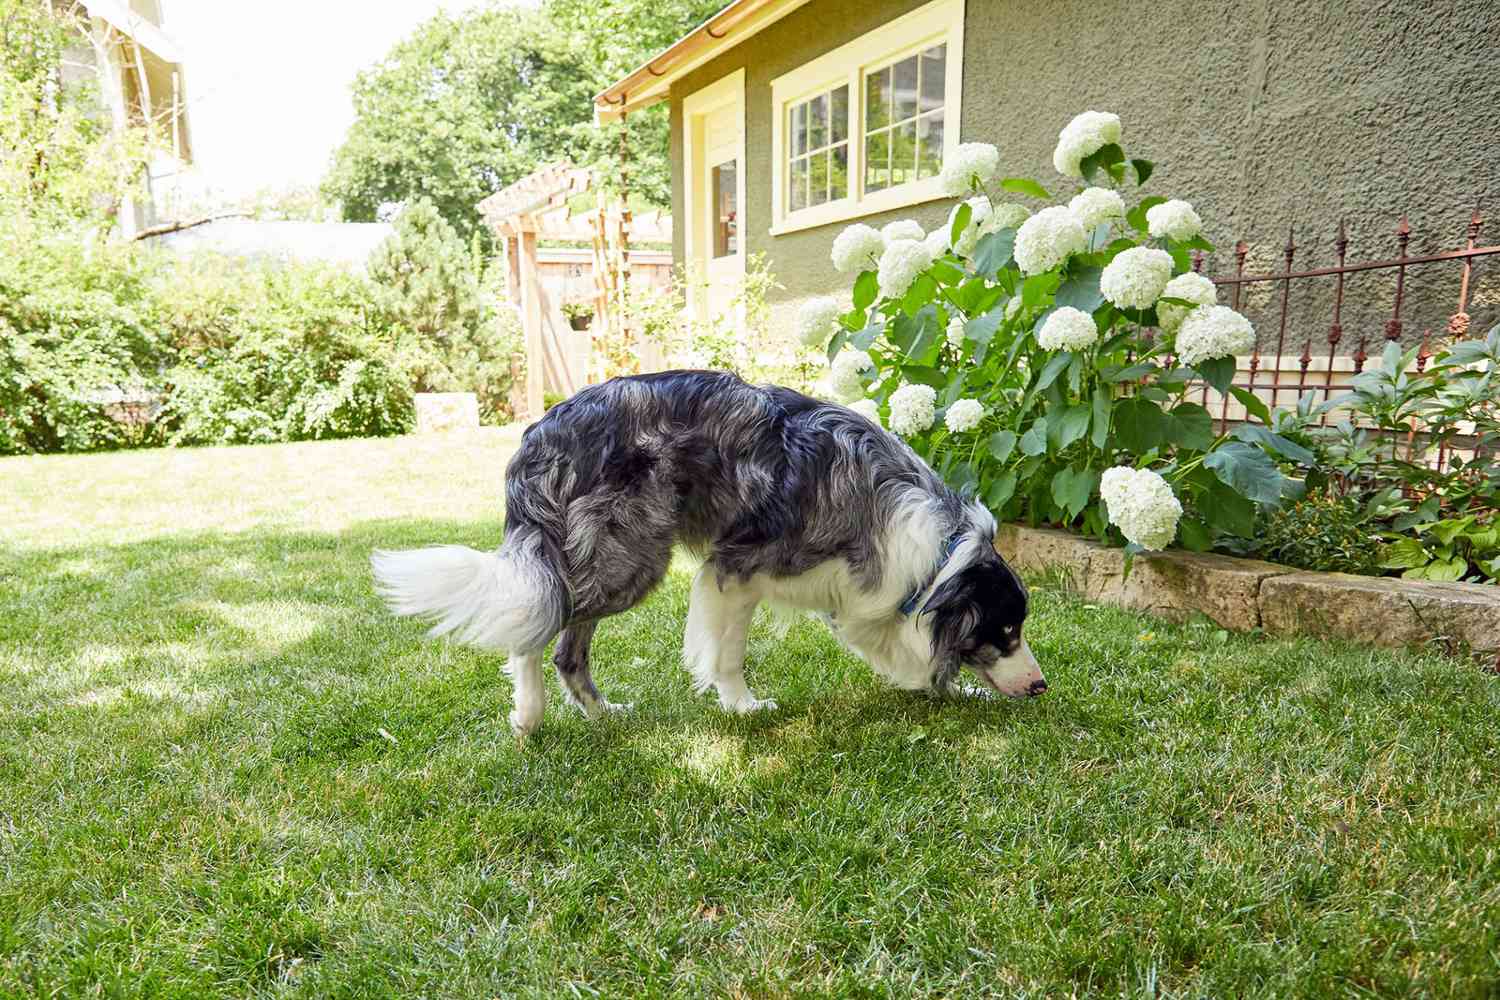 border collie sniffing the lawn in the backyard; does your dog have giardia?